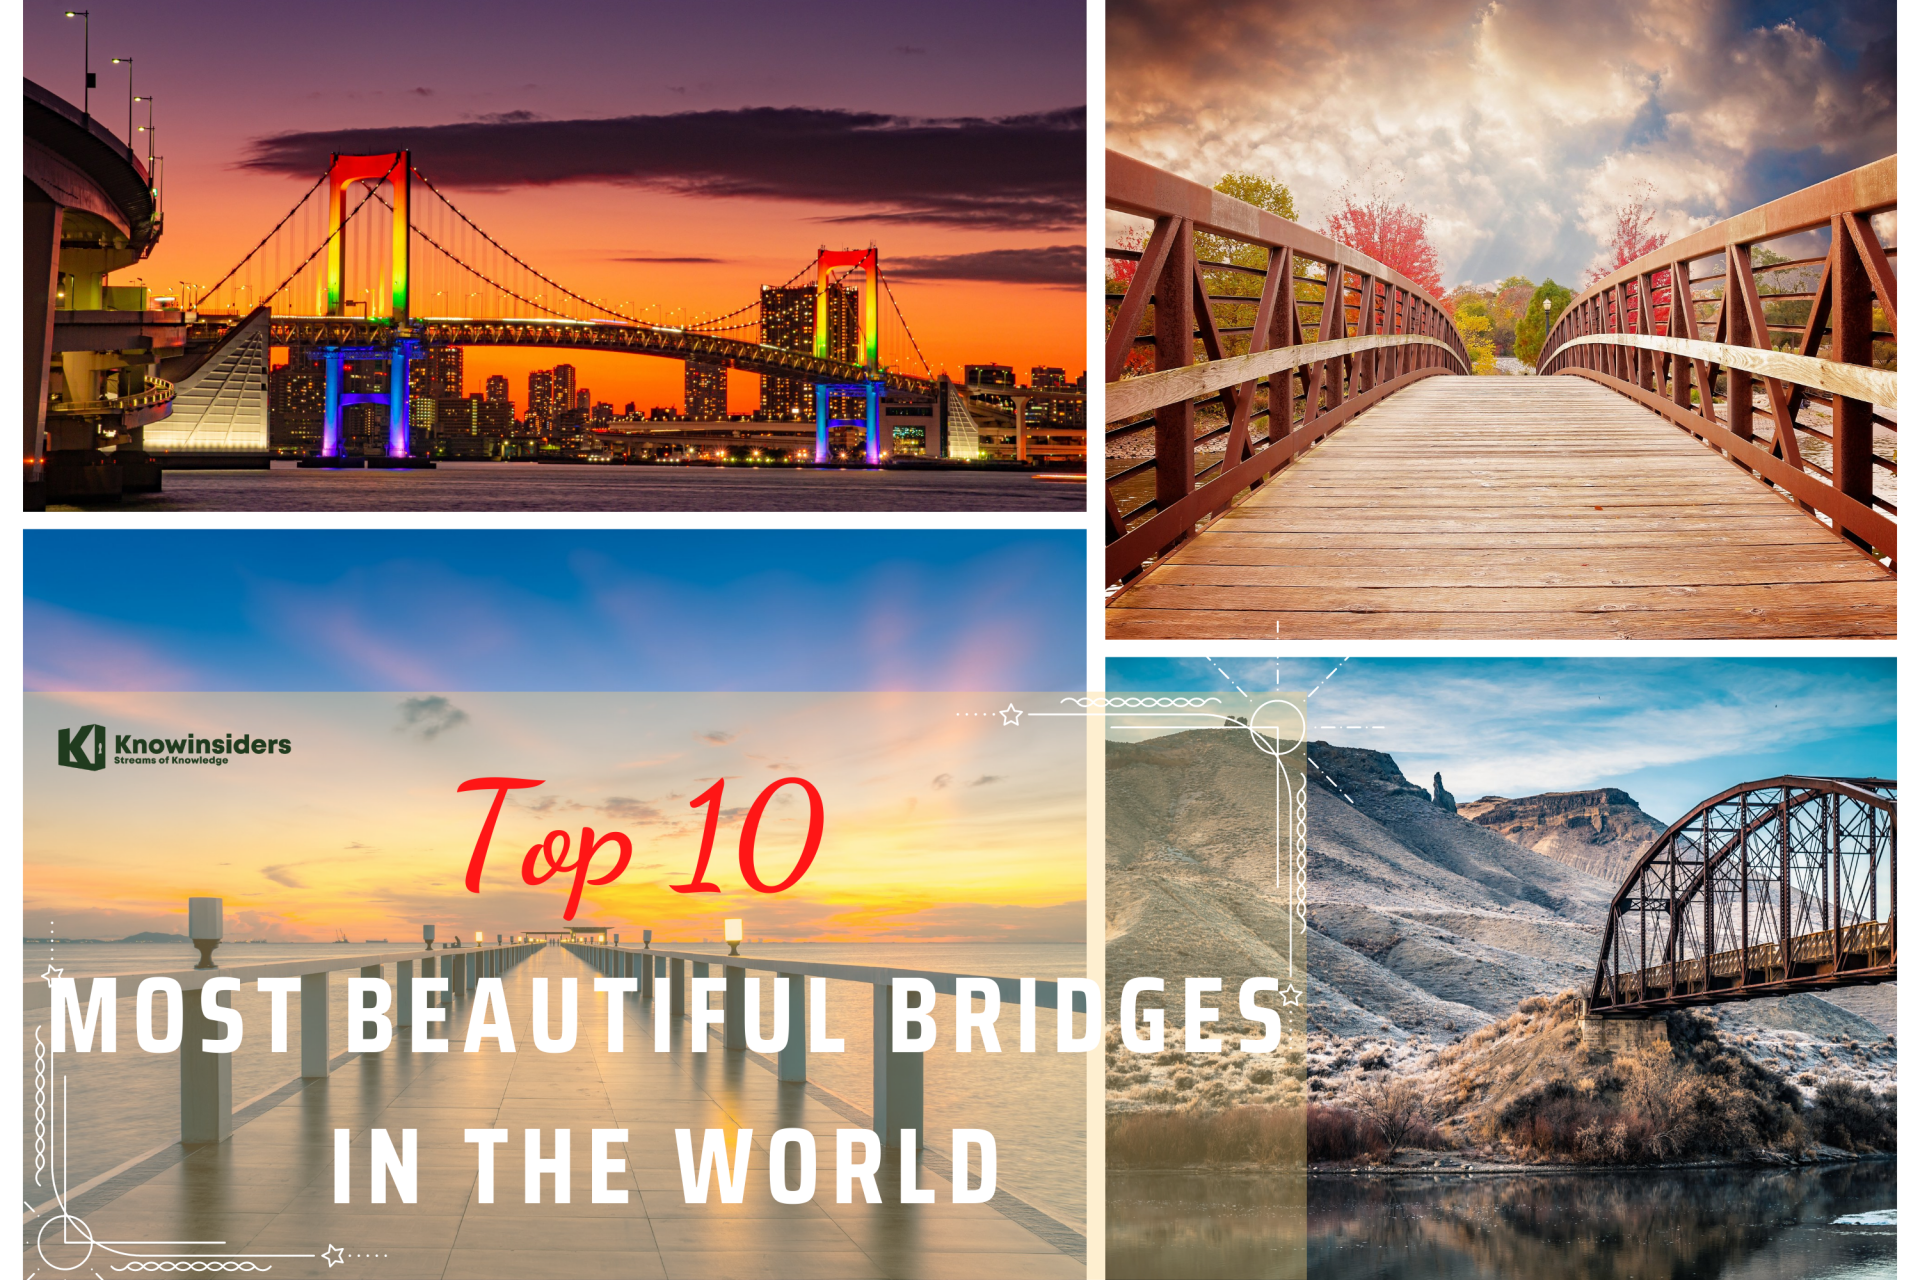 Top 10 Most Beautiful Bridges in the World